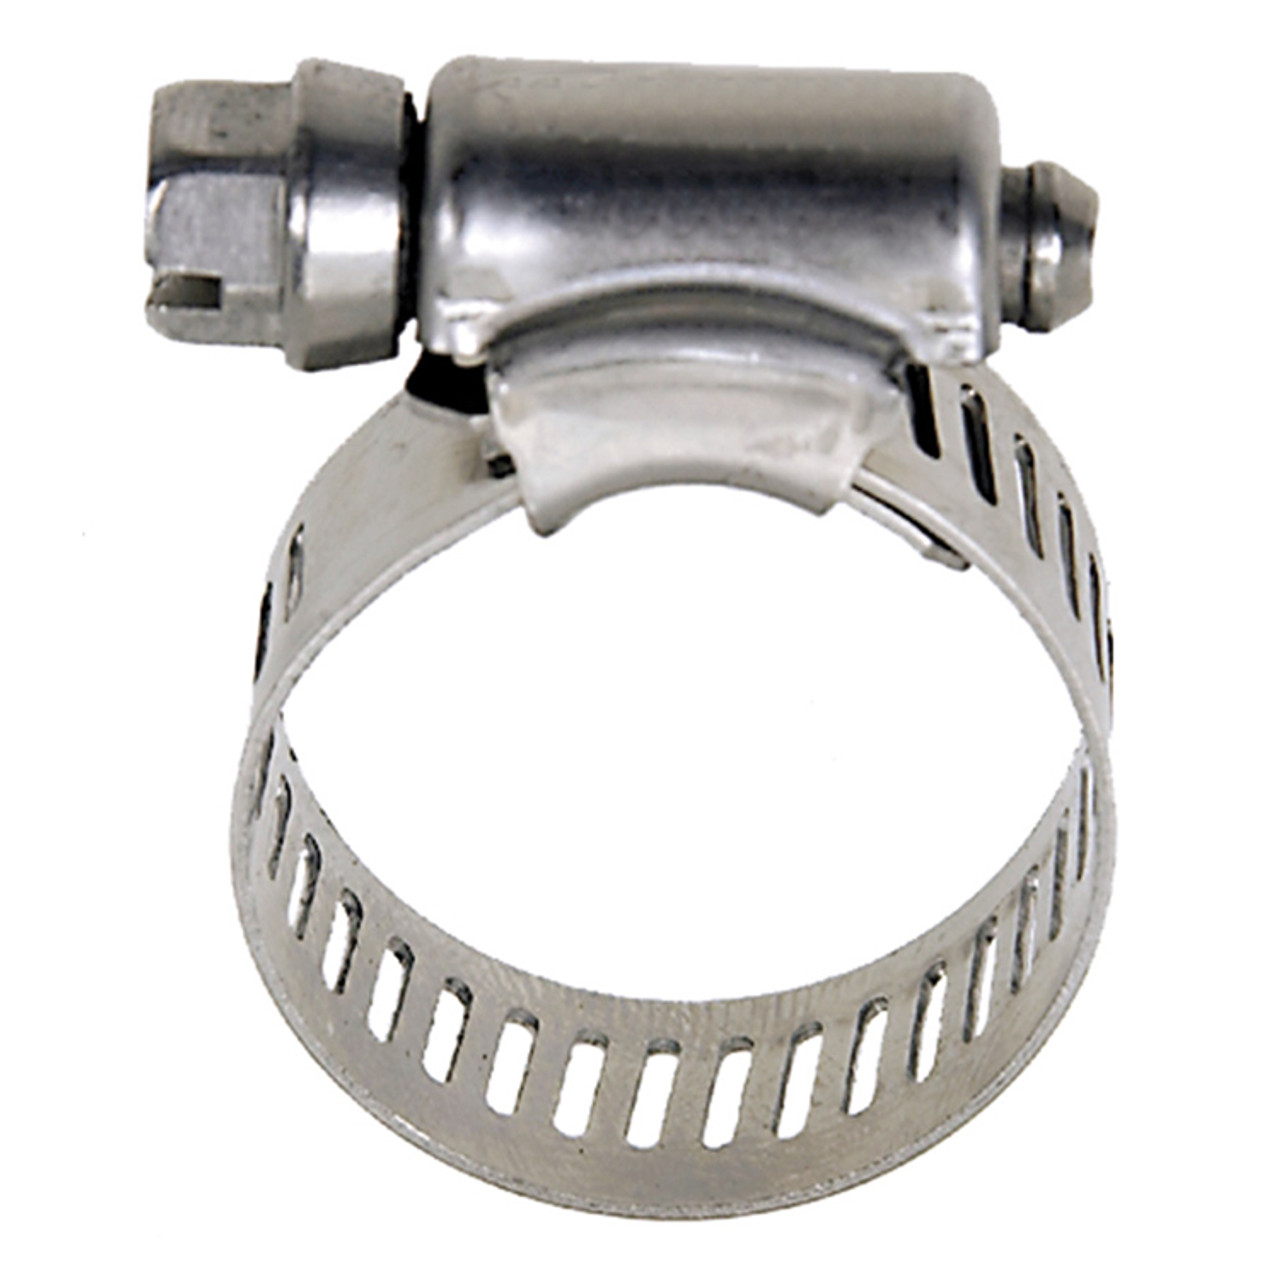 2" Stainless Steel Worm Gear Hose Clamp   G5-32